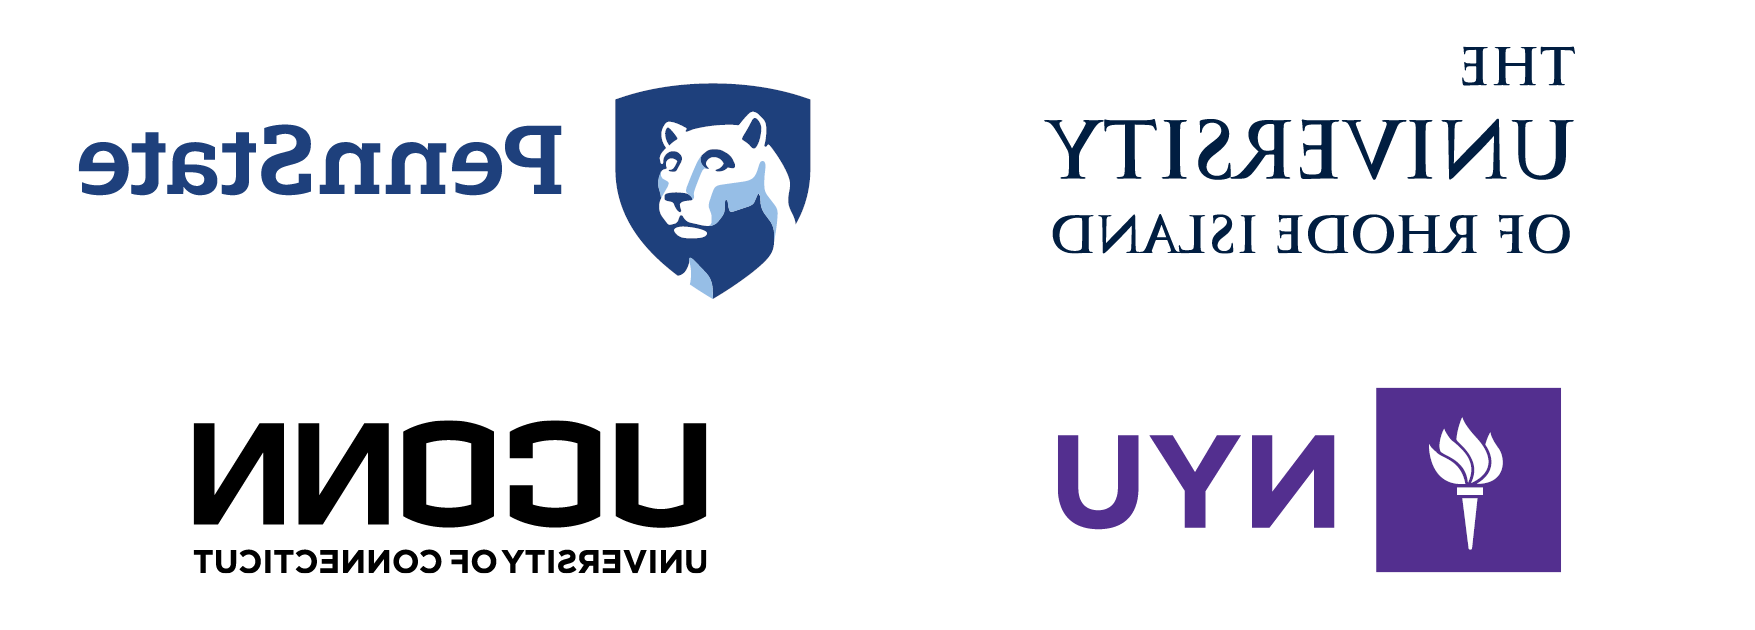 Logos of Doctor of Physical Therapy undergraduate programs: The University of Rhode Island, Penn State, NYU, University of Connecticut